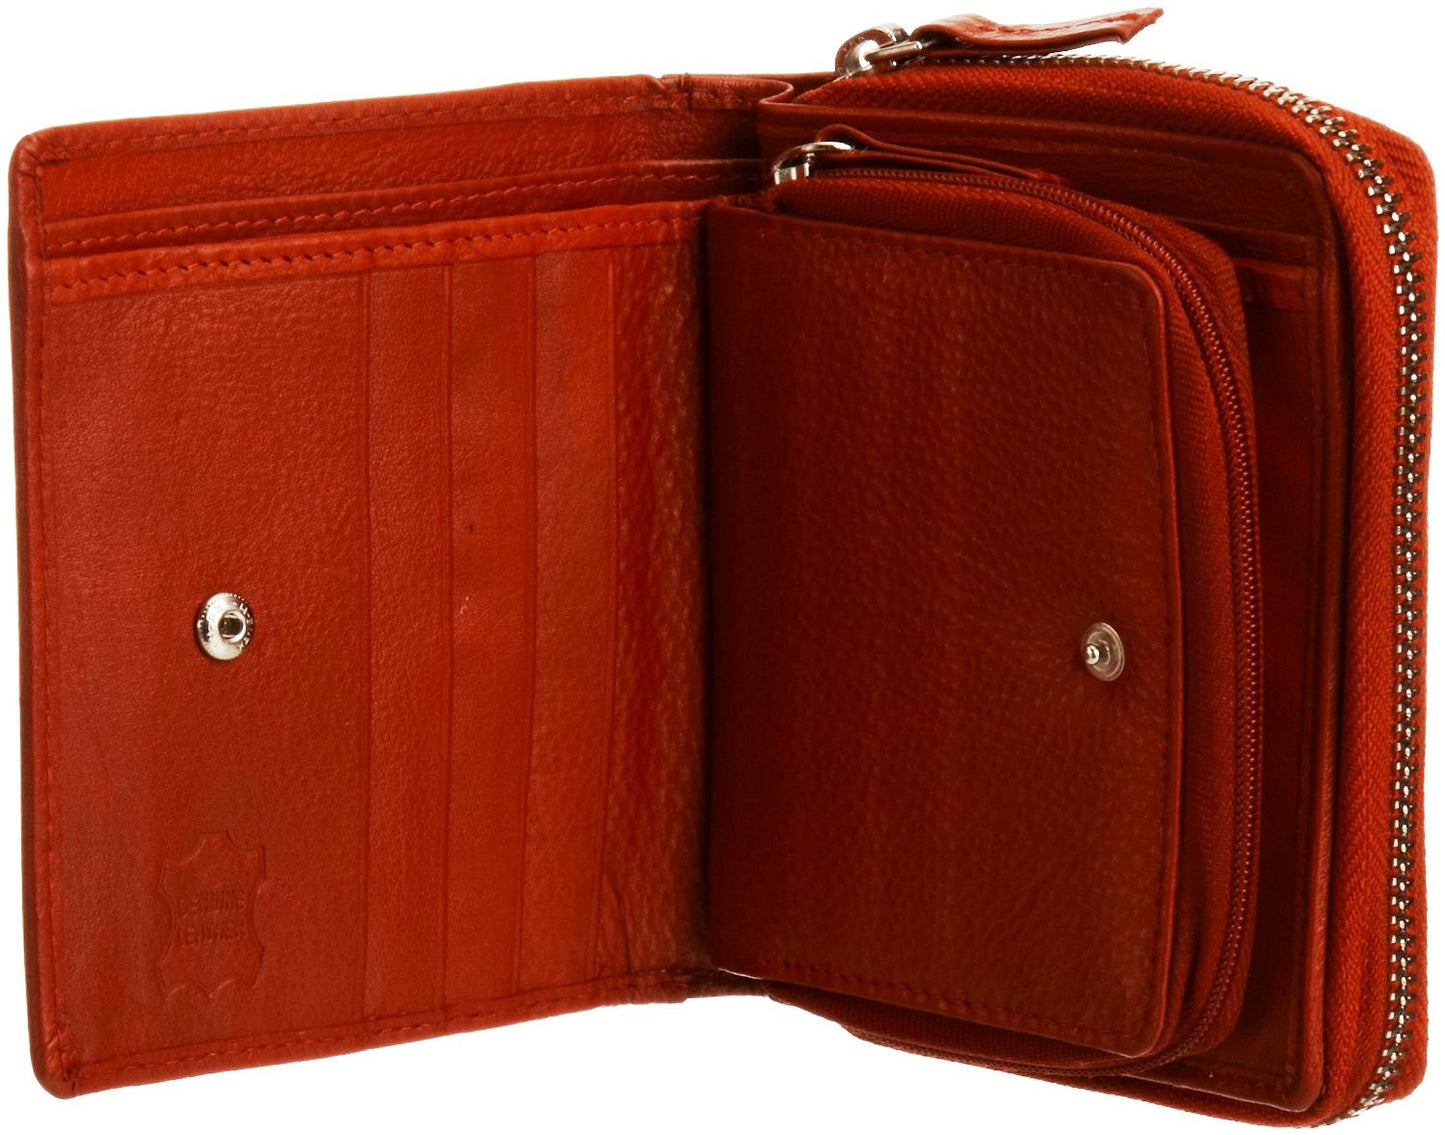 Pratico - women leather trifold wallet #LW01 Red